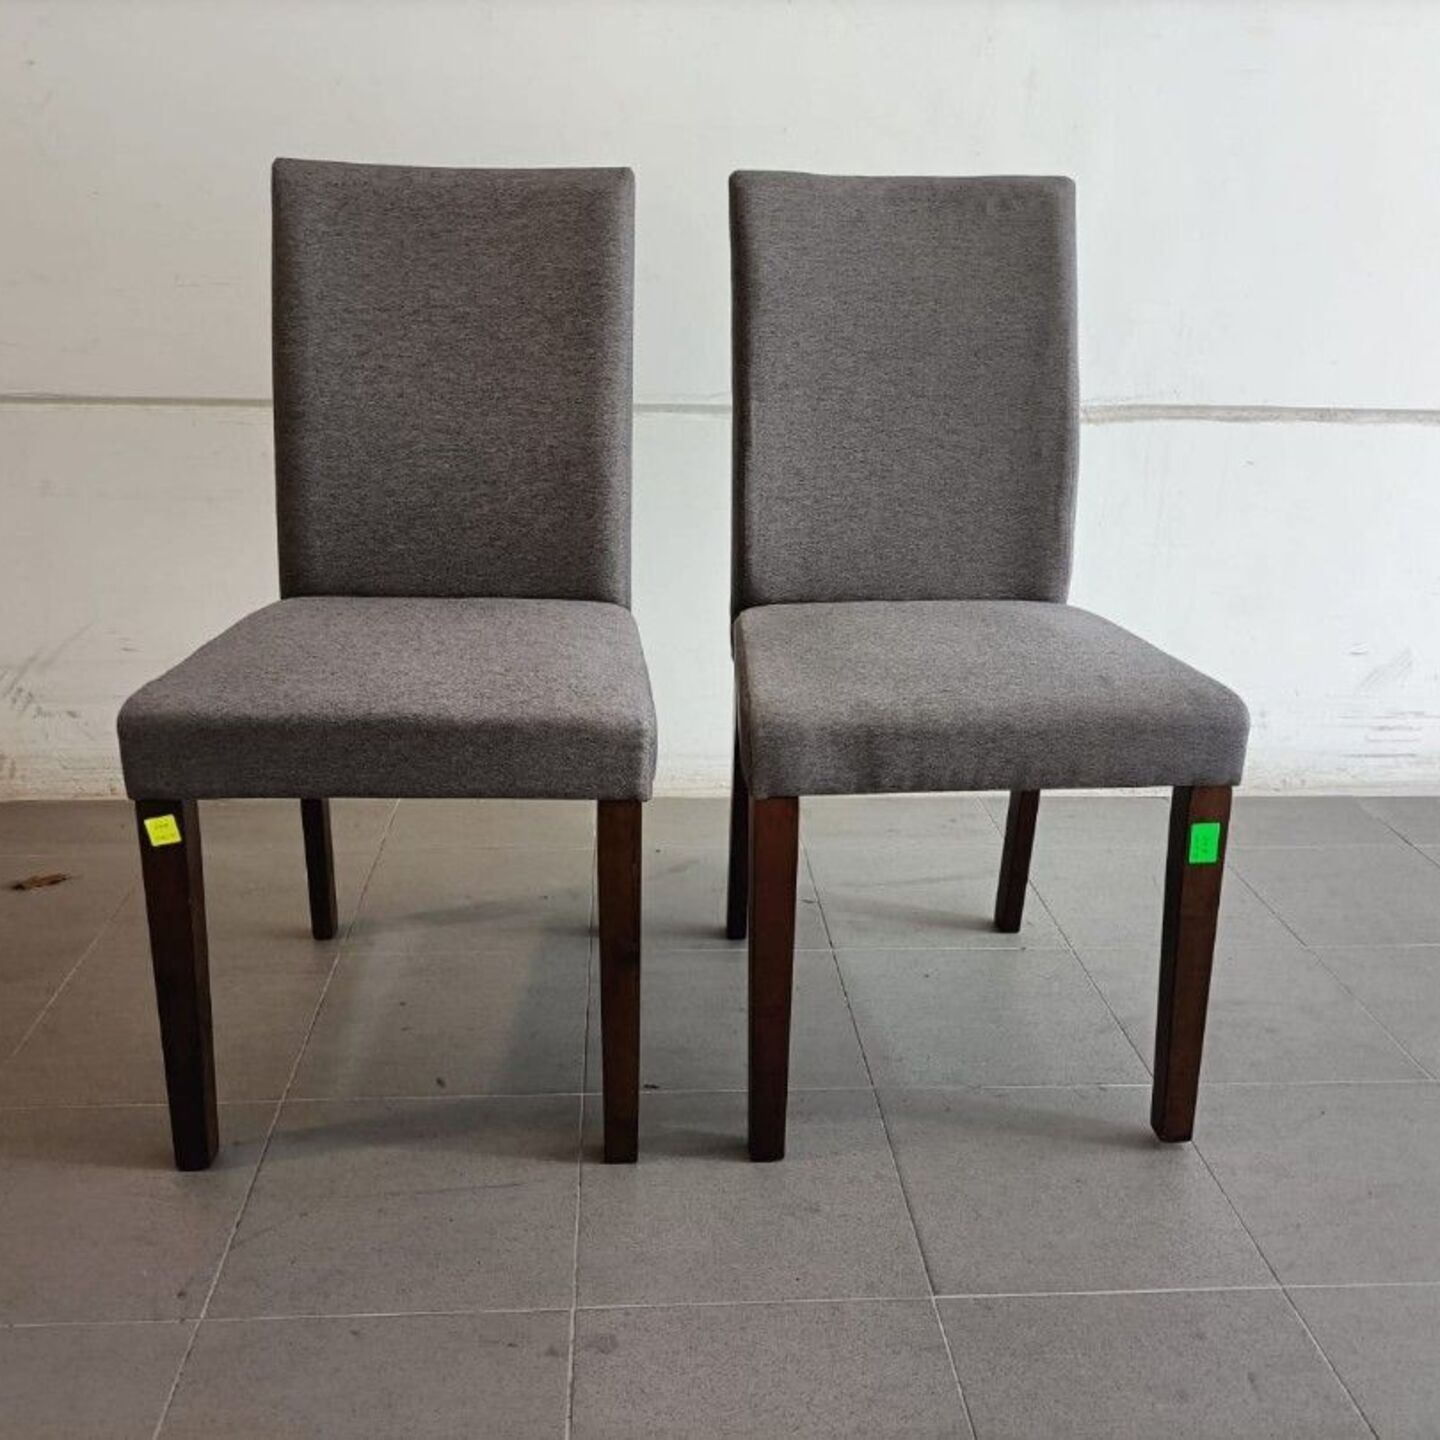 2 x HUNSDALE Dining Chairs in WENGE